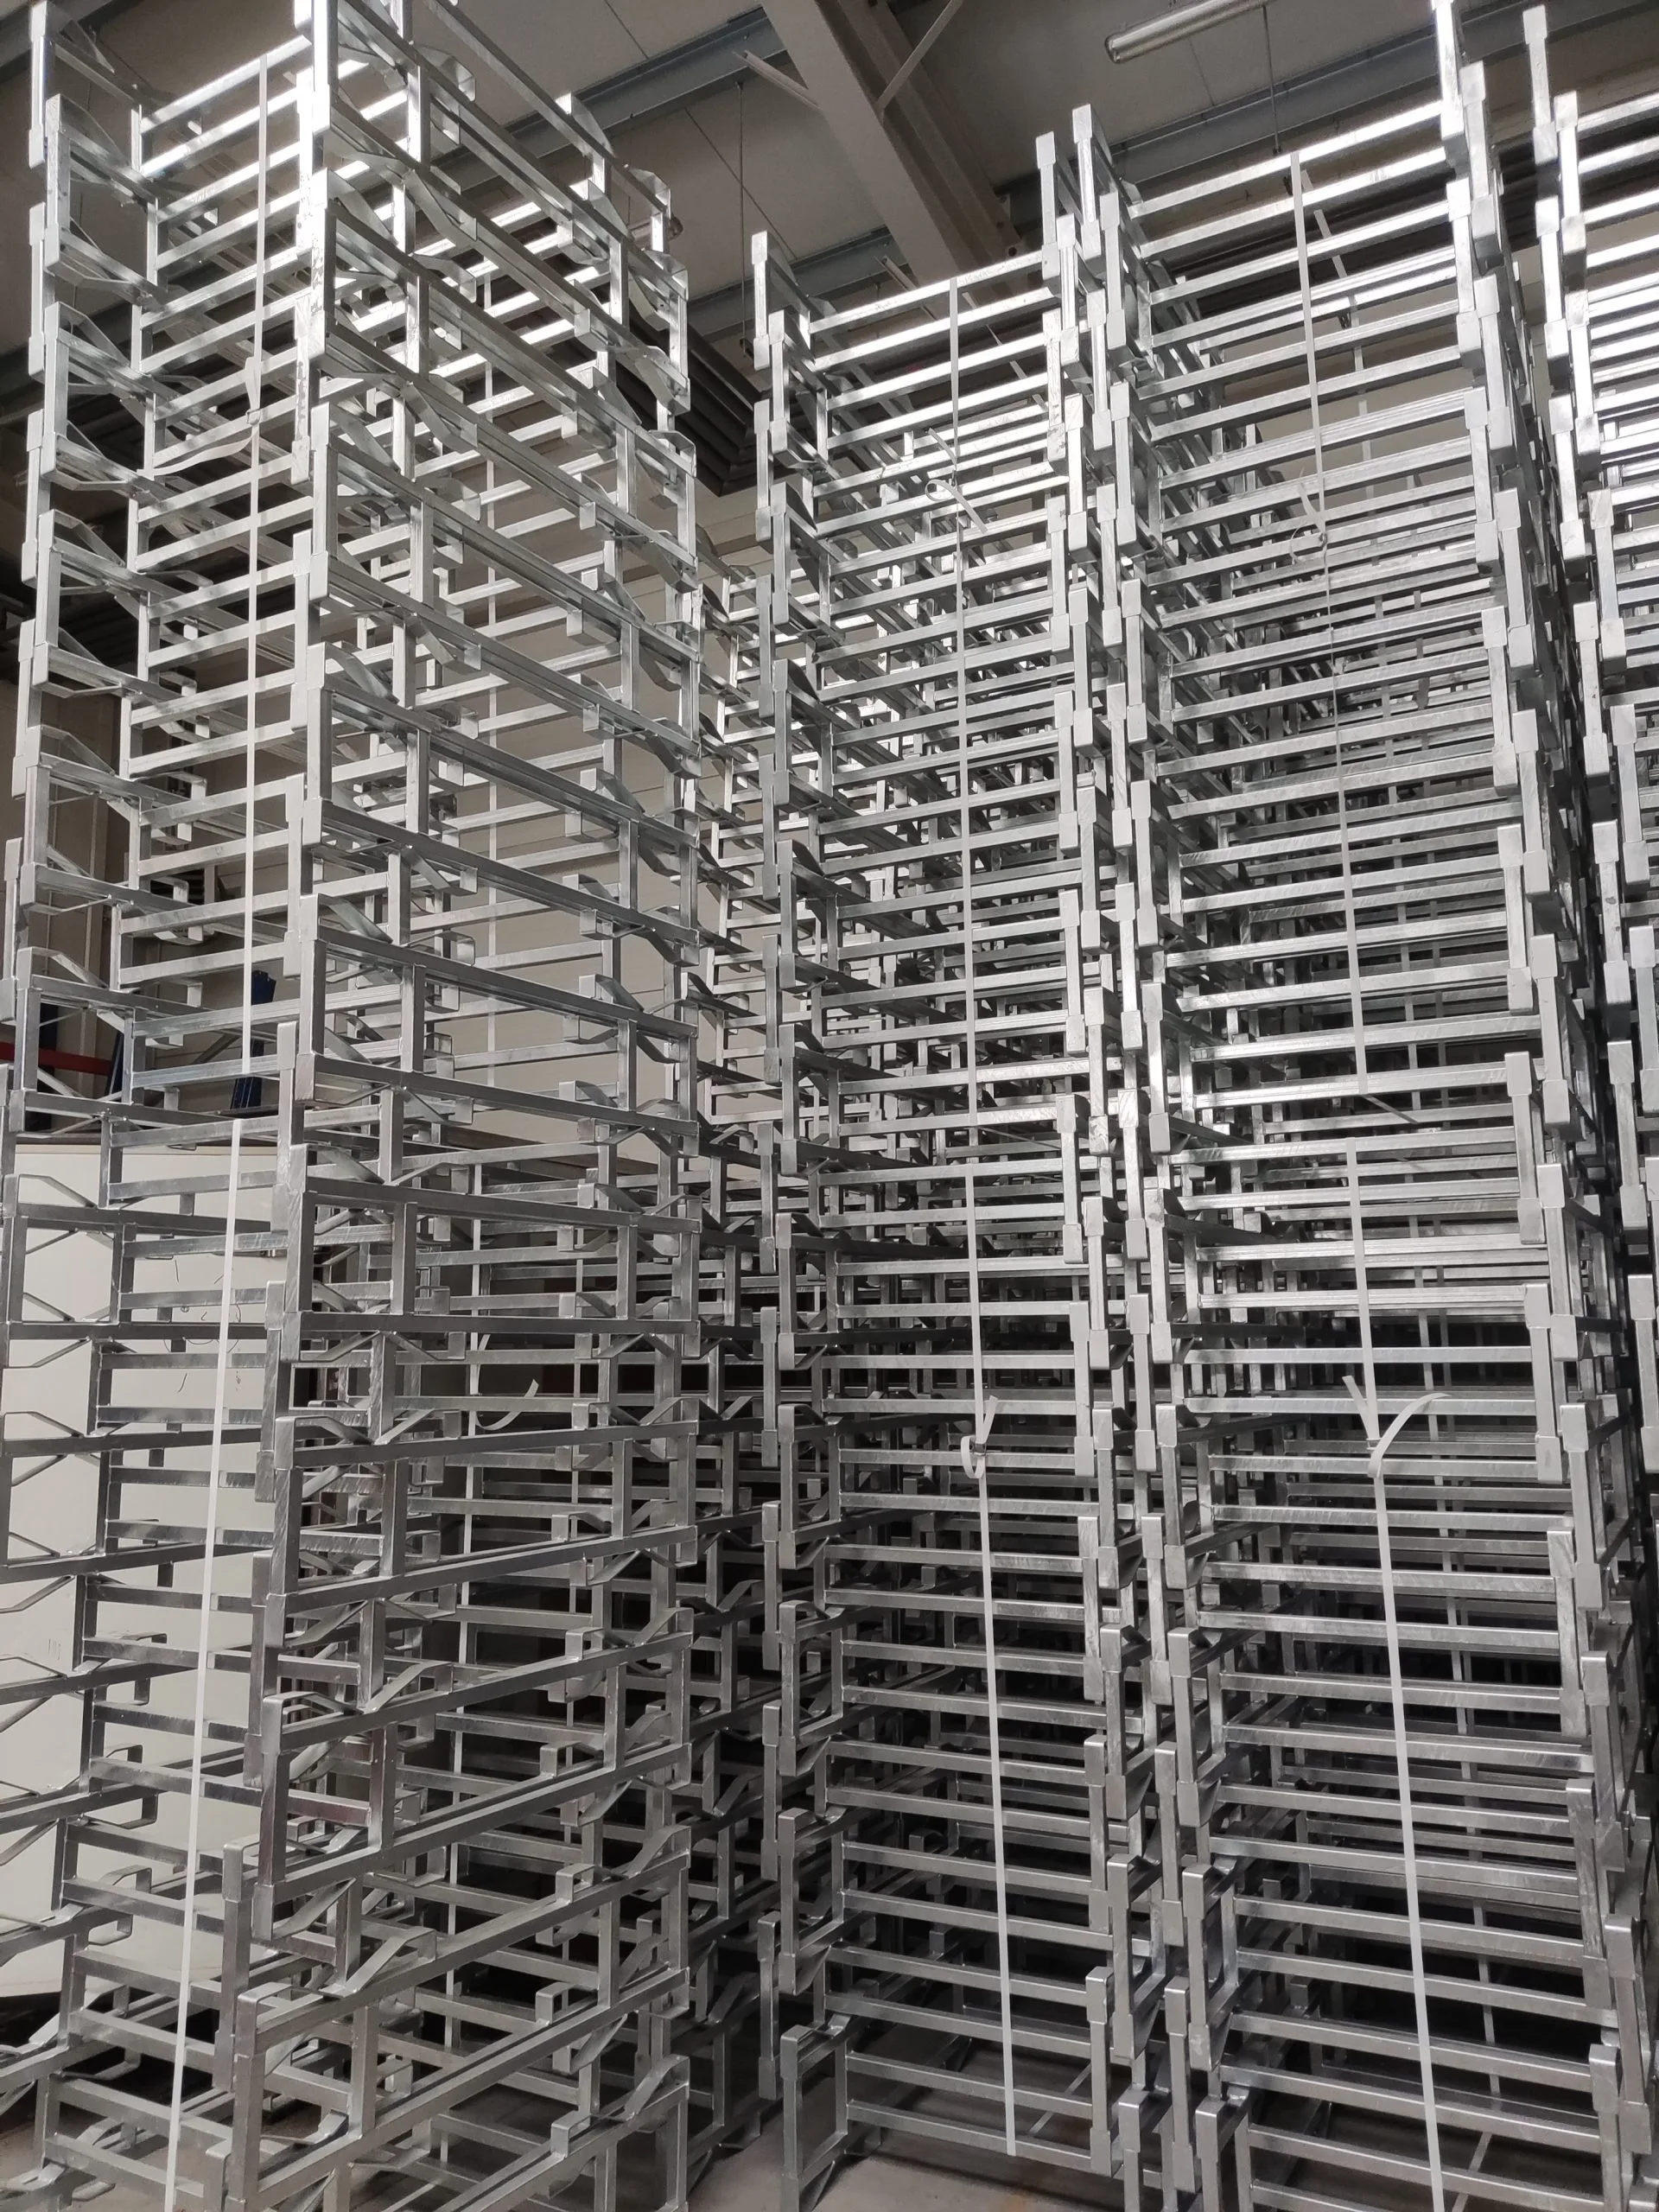 Racks for two stainless steel barrels